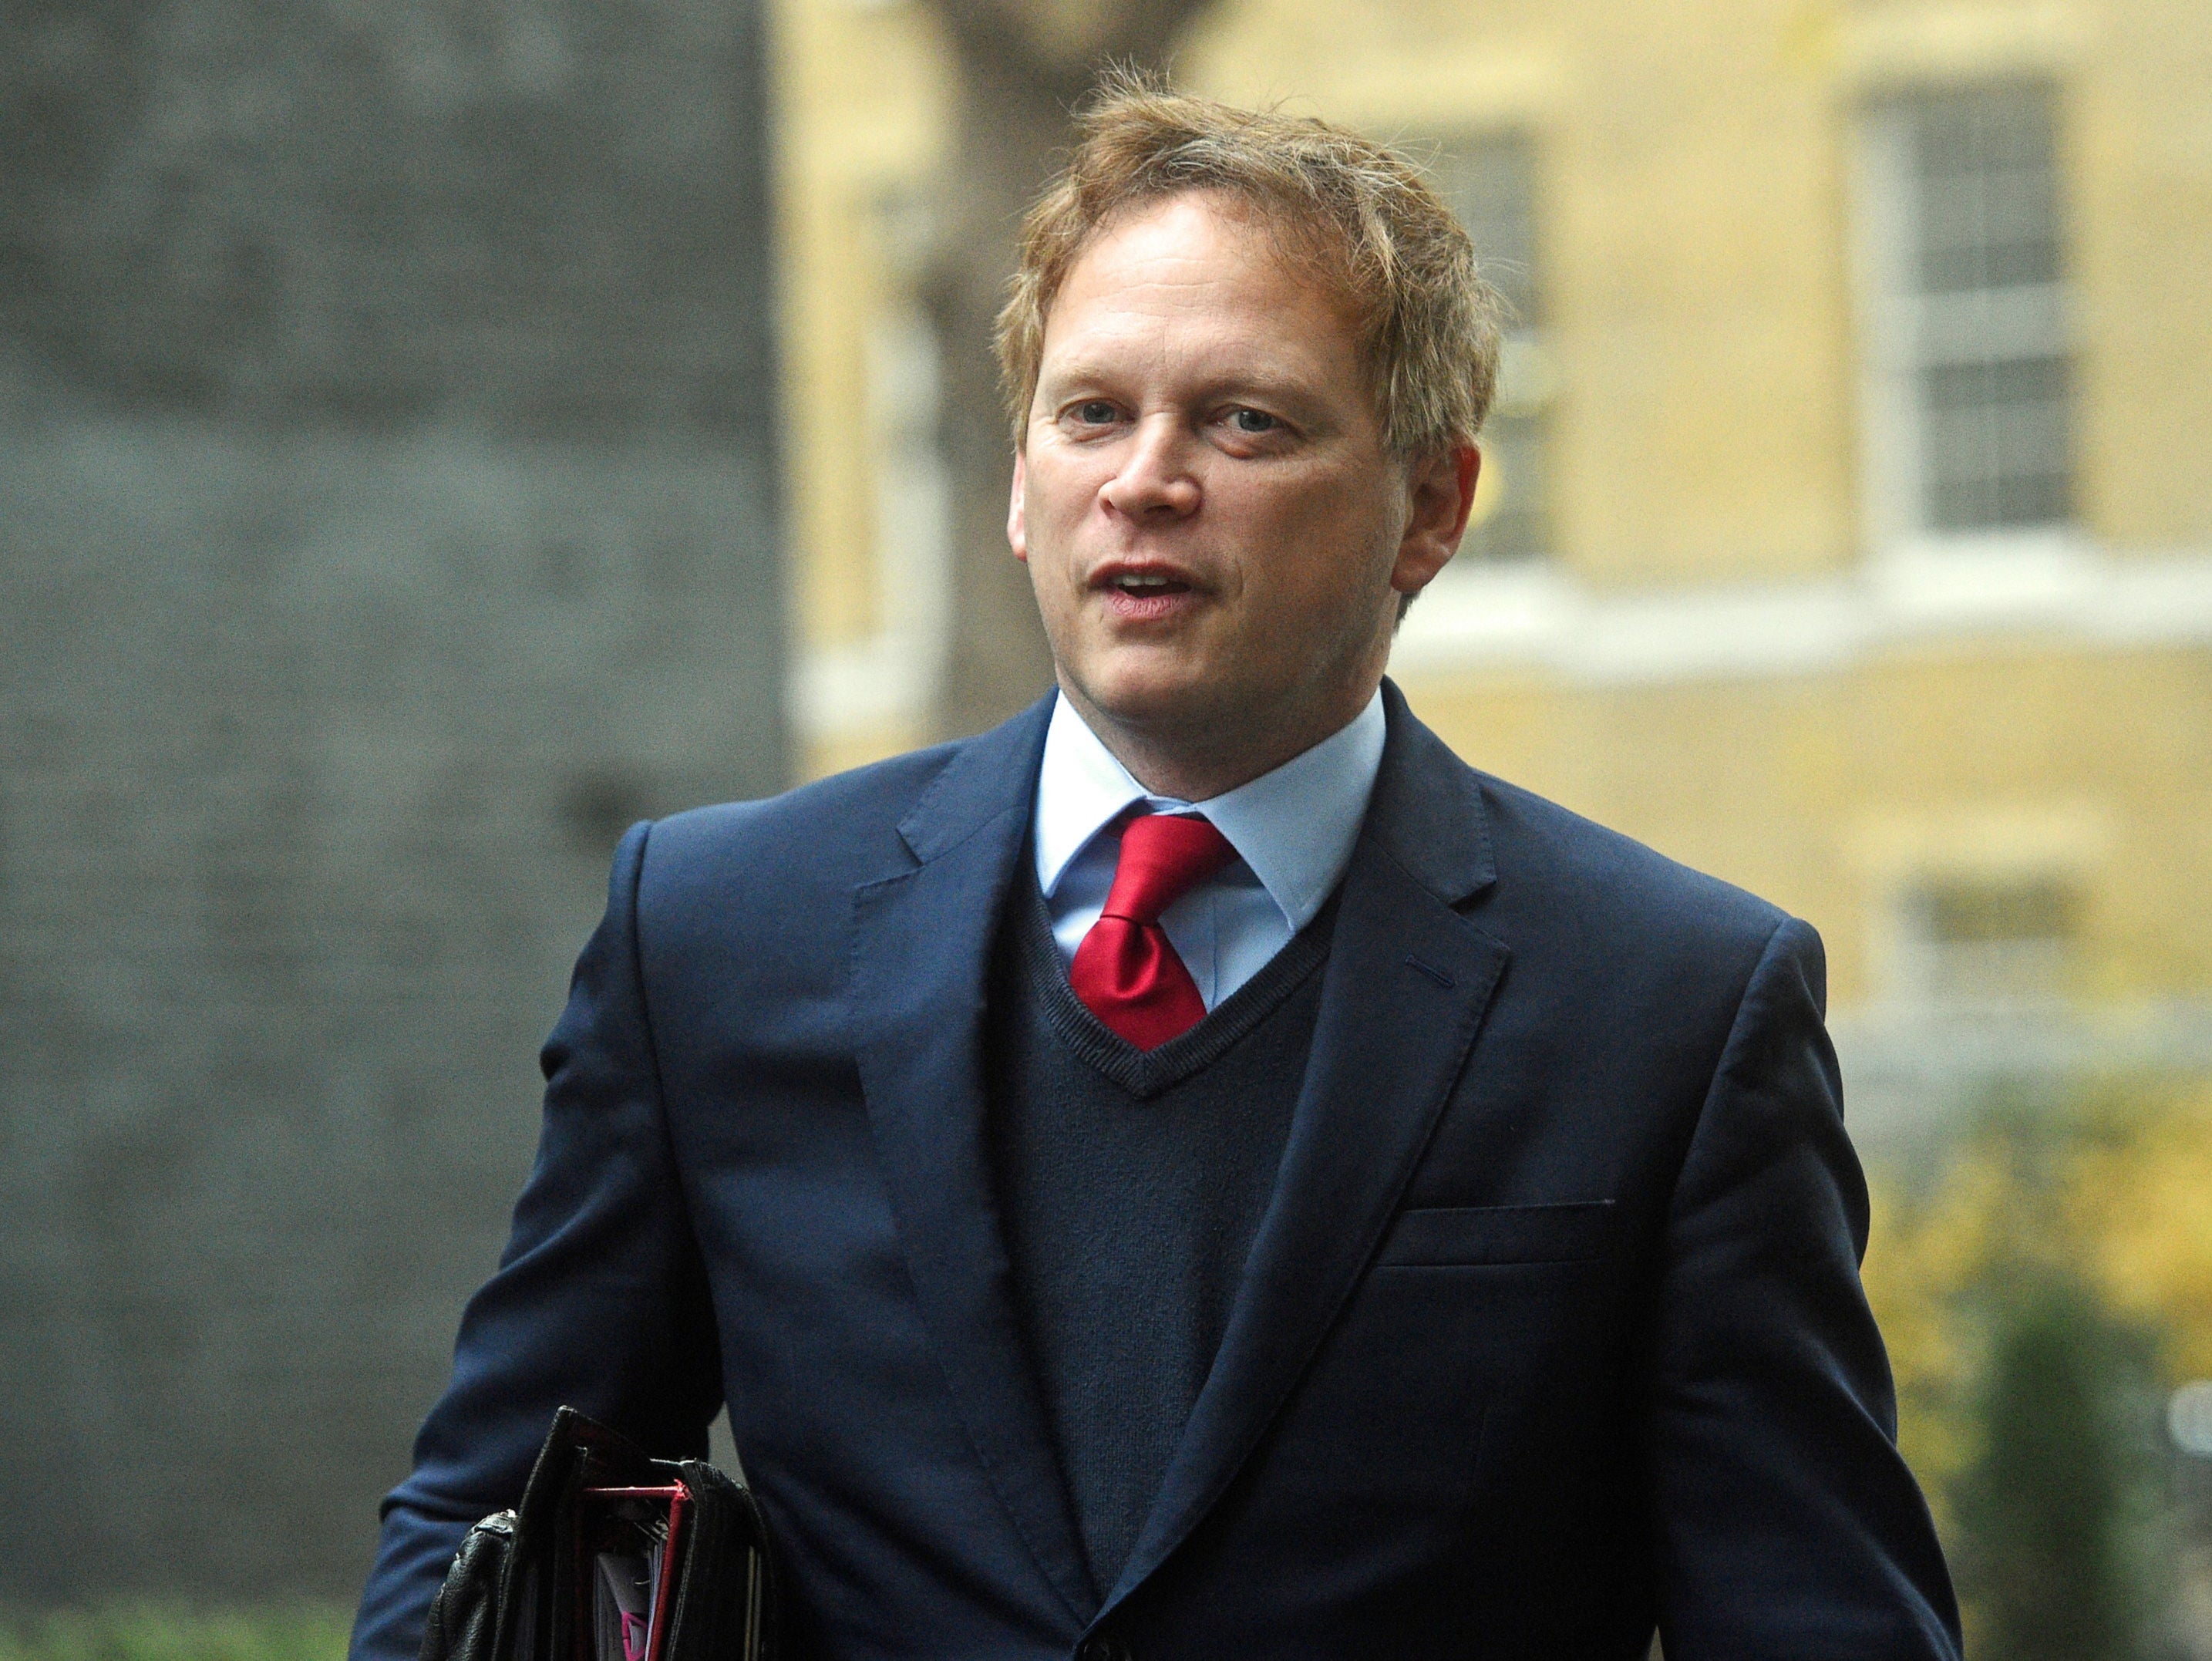 Grant Shapps hasn’t gone as far as reimagining the entire infrastructure of the country